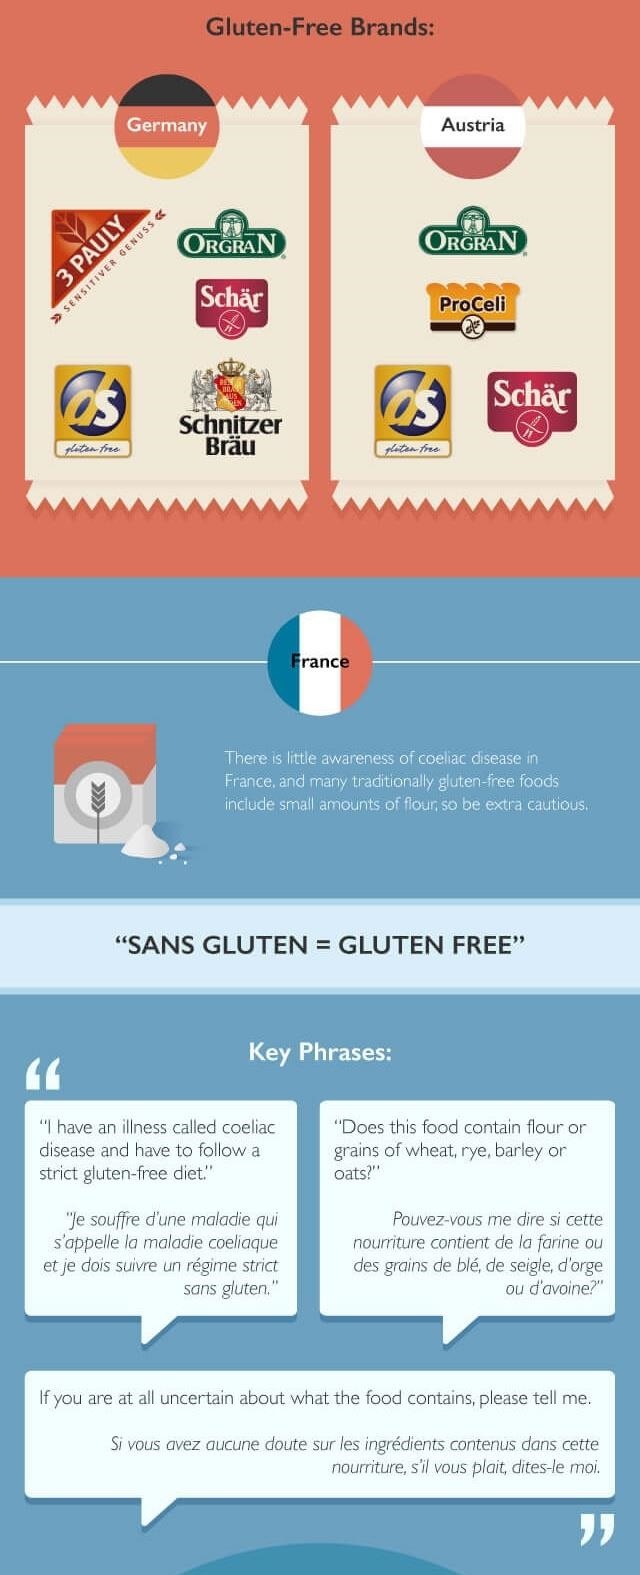 How to Eat Gluten-Free Abroad